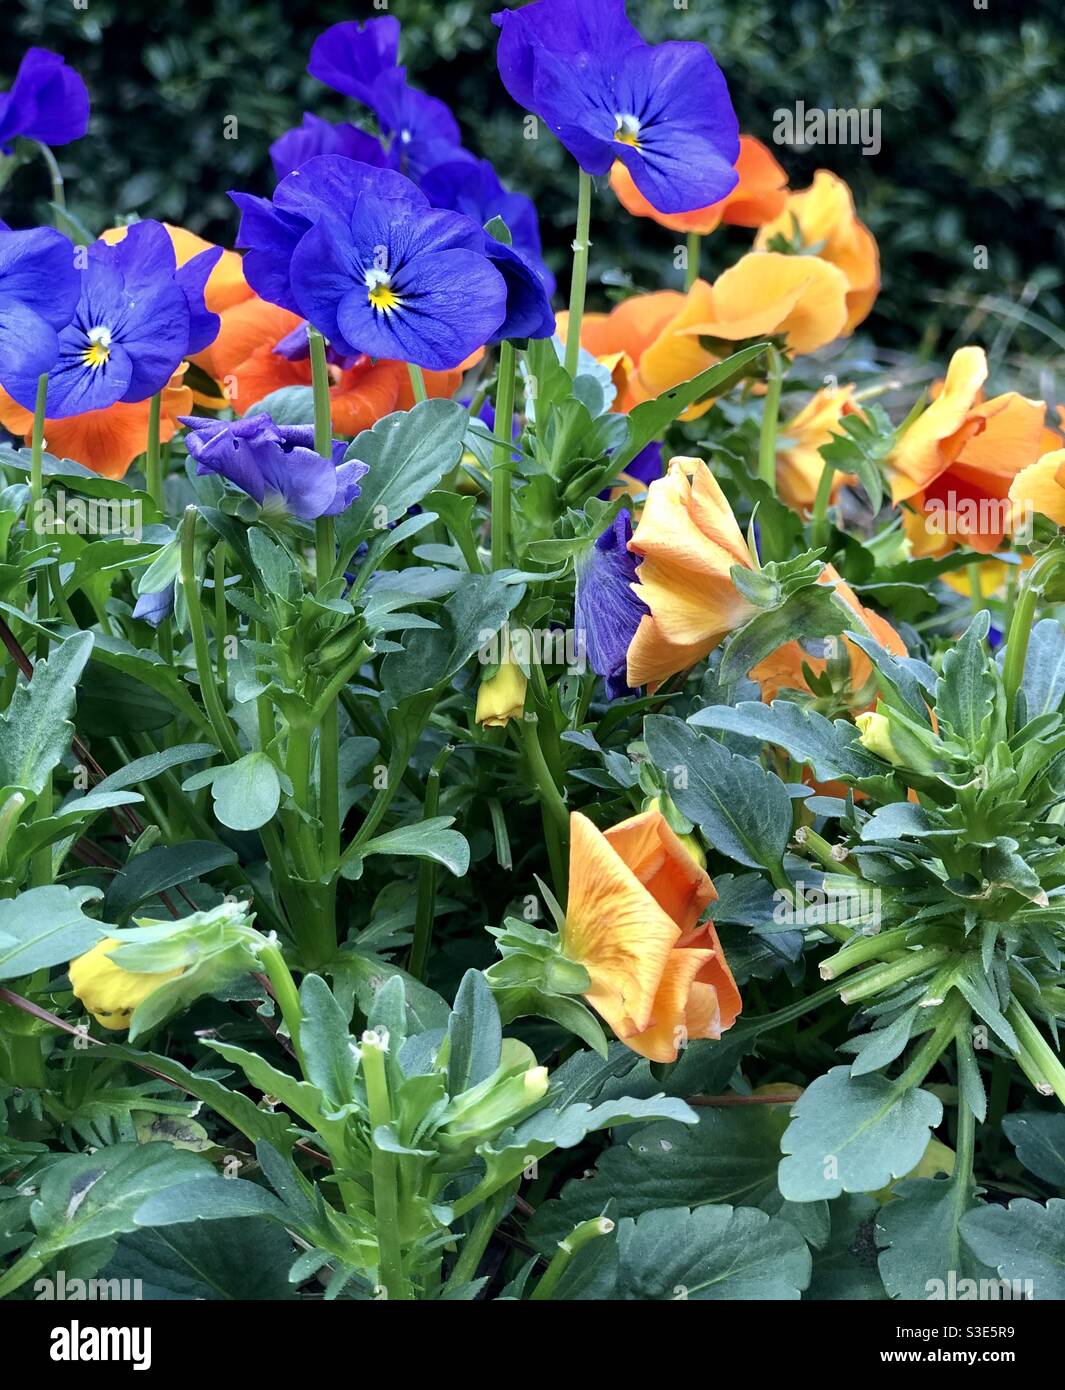 Vibrant colors of springtime pansies Stock Photo